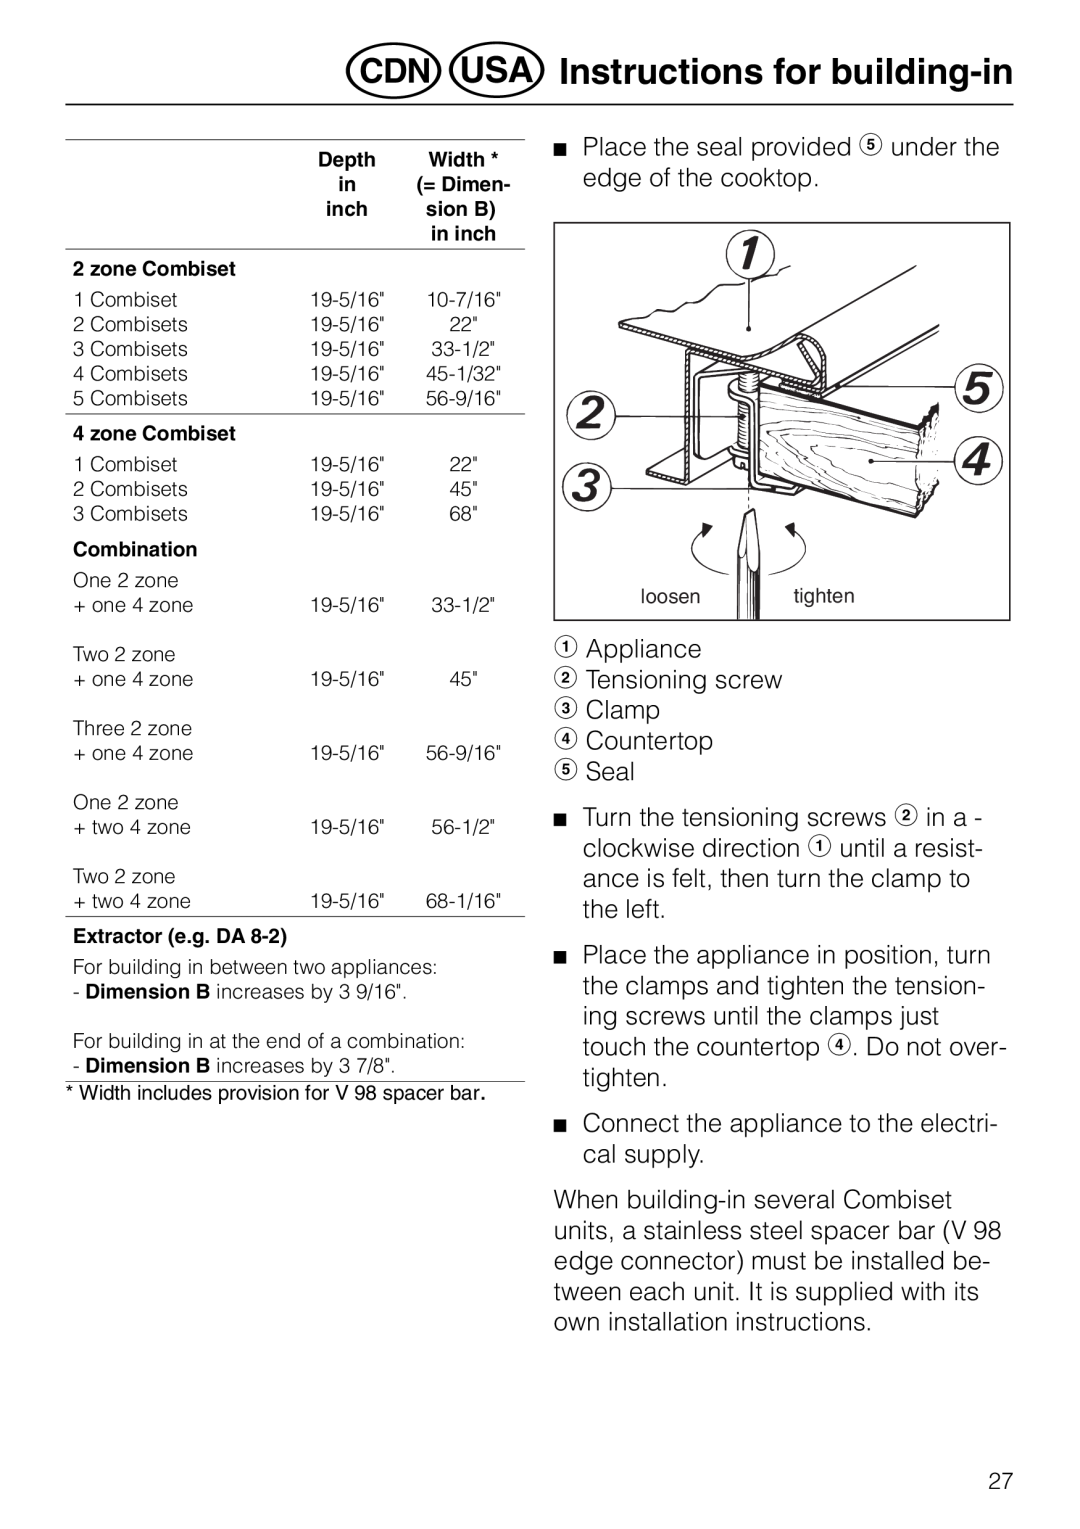 Miele KM 81-2 operating instructions öInstructions for building-in, bAppliance cTensioning screw d Clamp 